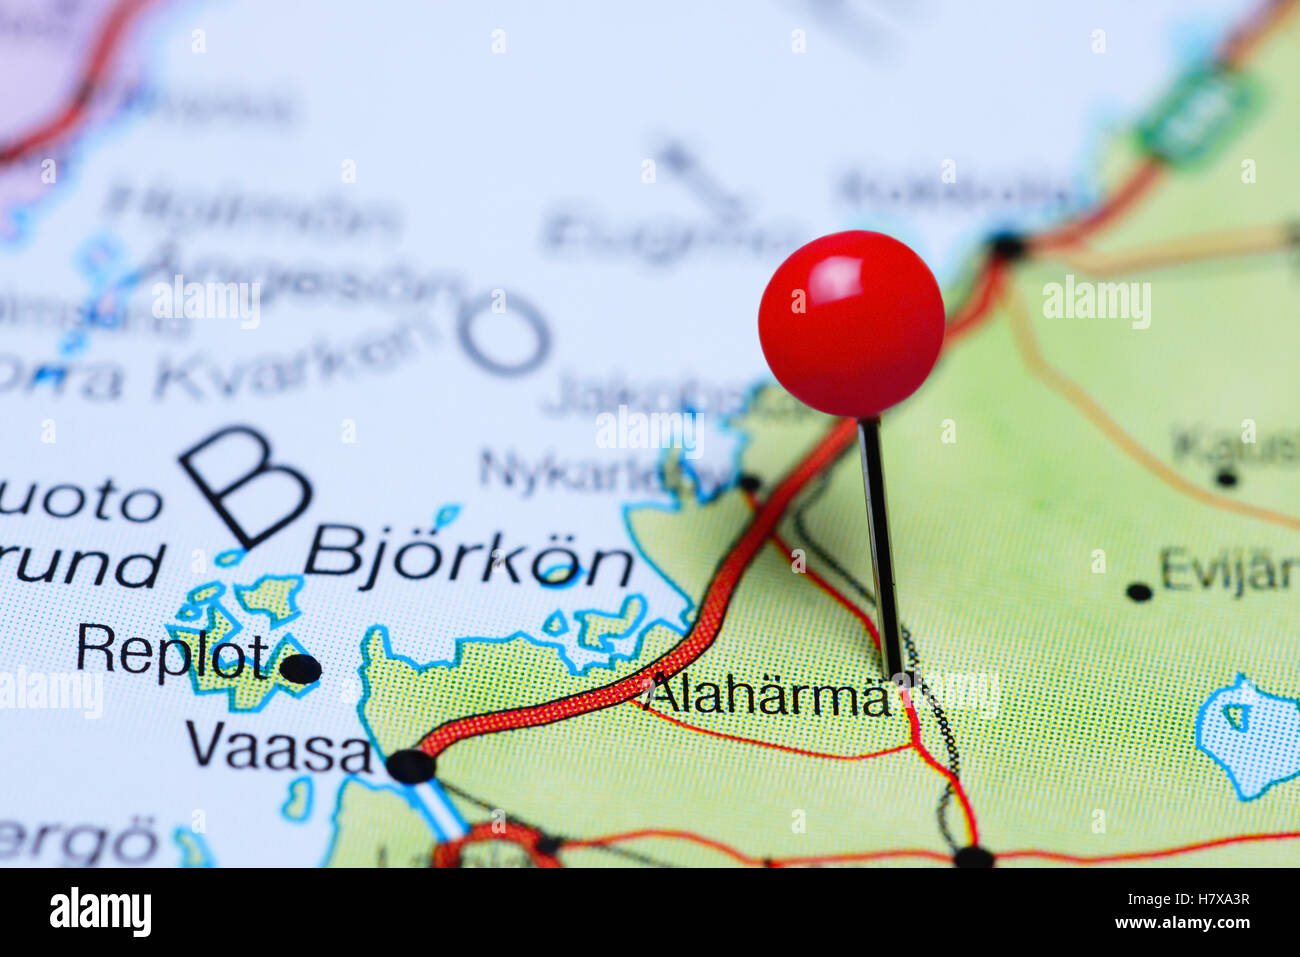 Alaharma pinned on a map of Finland Stock Photo